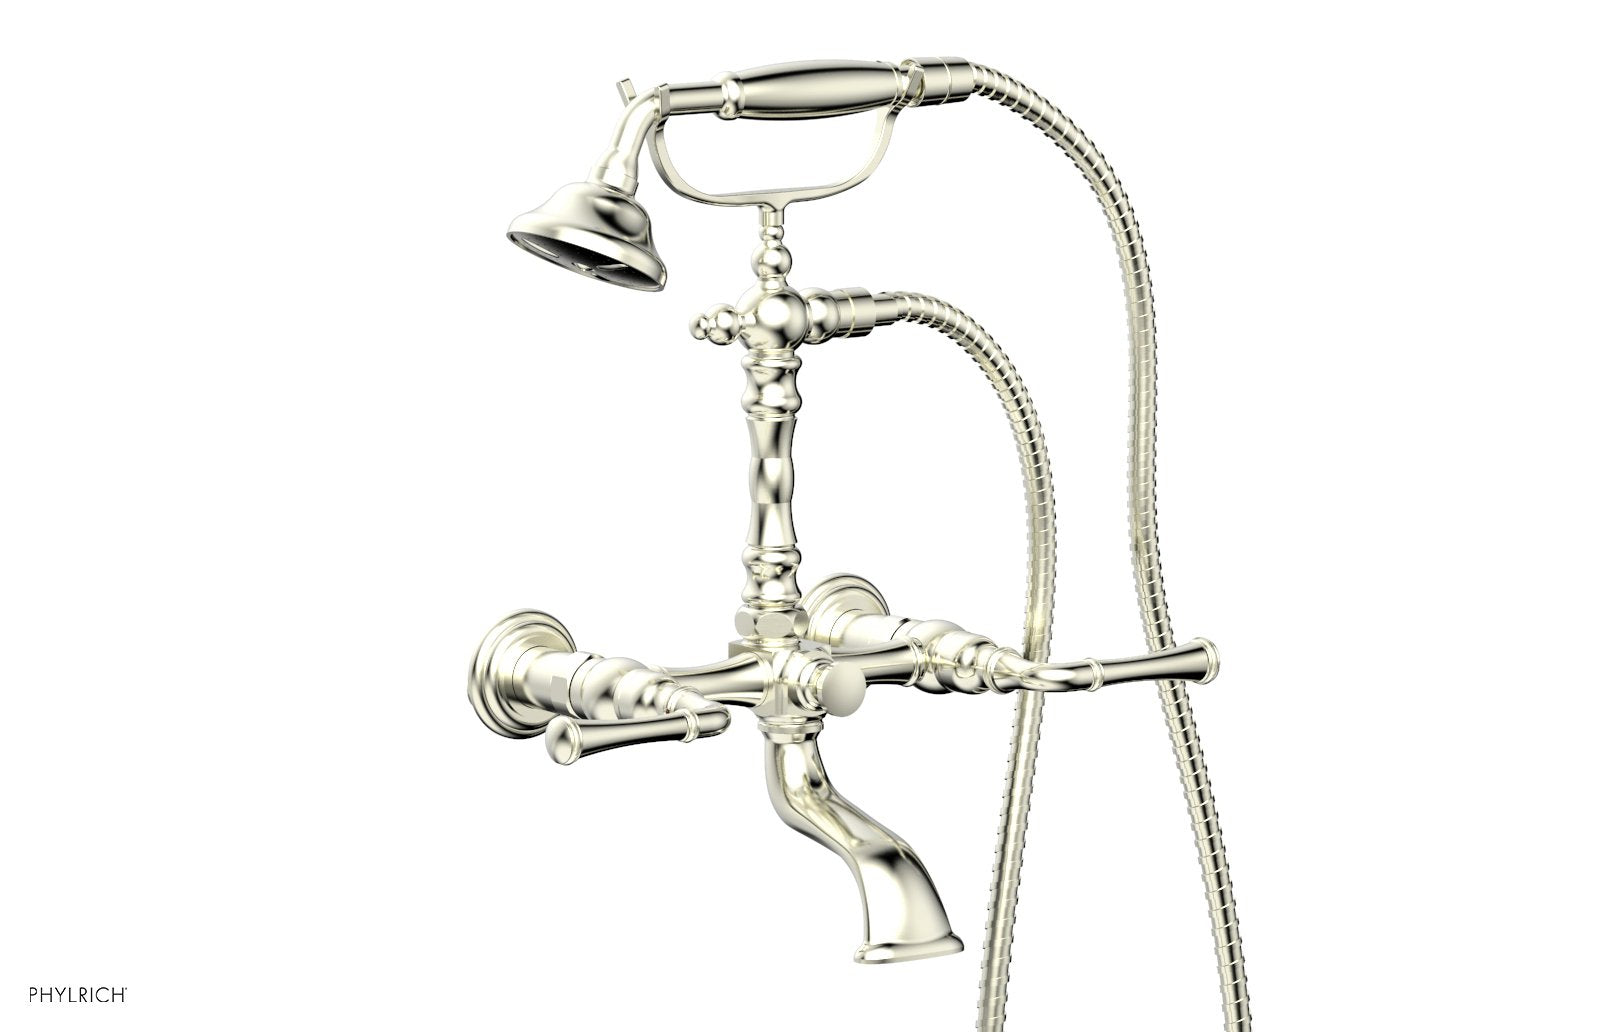 Phylrich COINED Exposed Tub & Hand Shower - Lever Handle